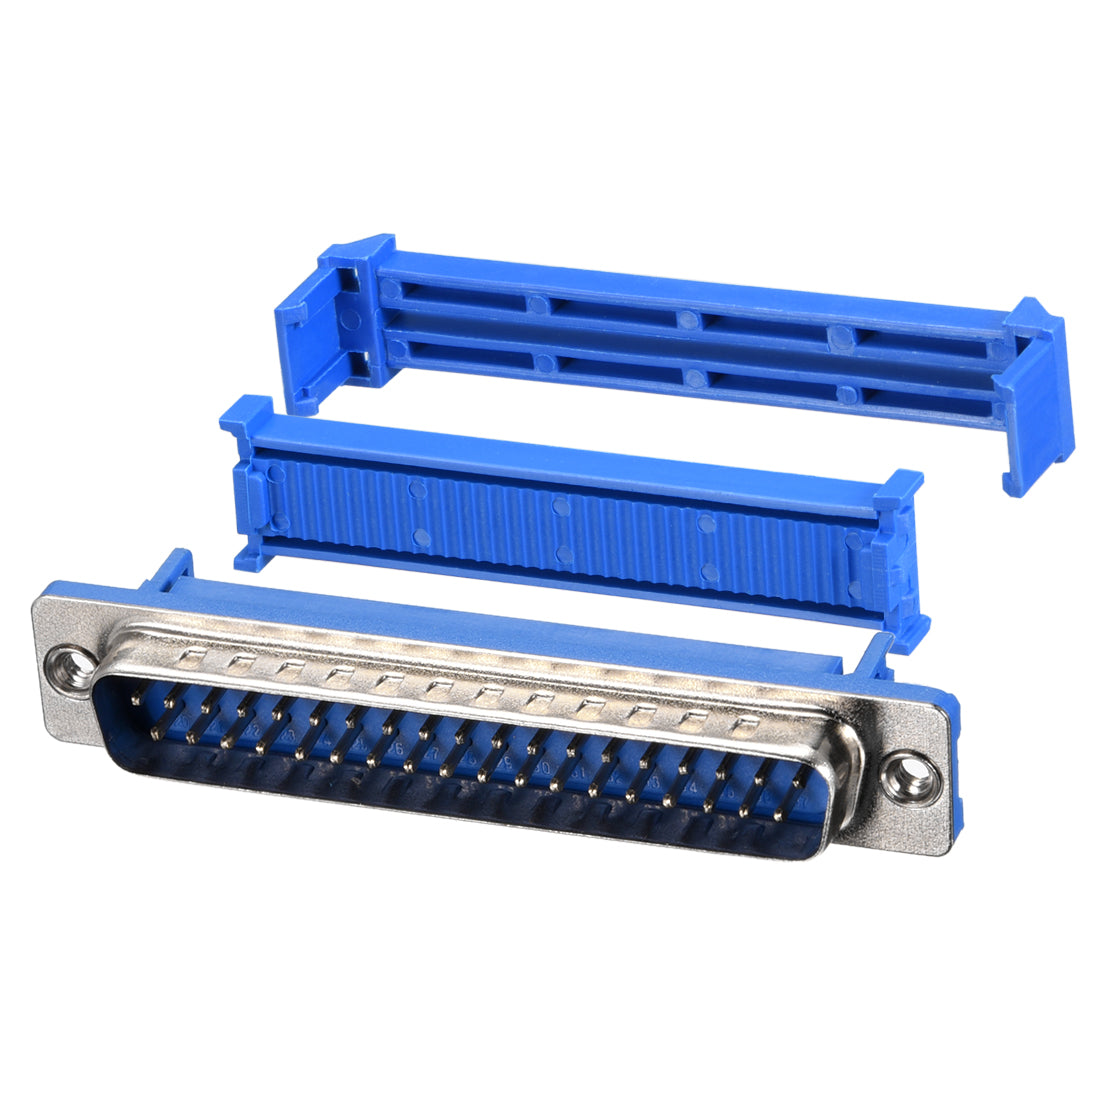 uxcell Uxcell IDC D-Sub Ribbon Cable Connector 37-pin 2-row Male Plug IDC Crimp Port Terminal Breakout for Flat Ribbon Cable Blue